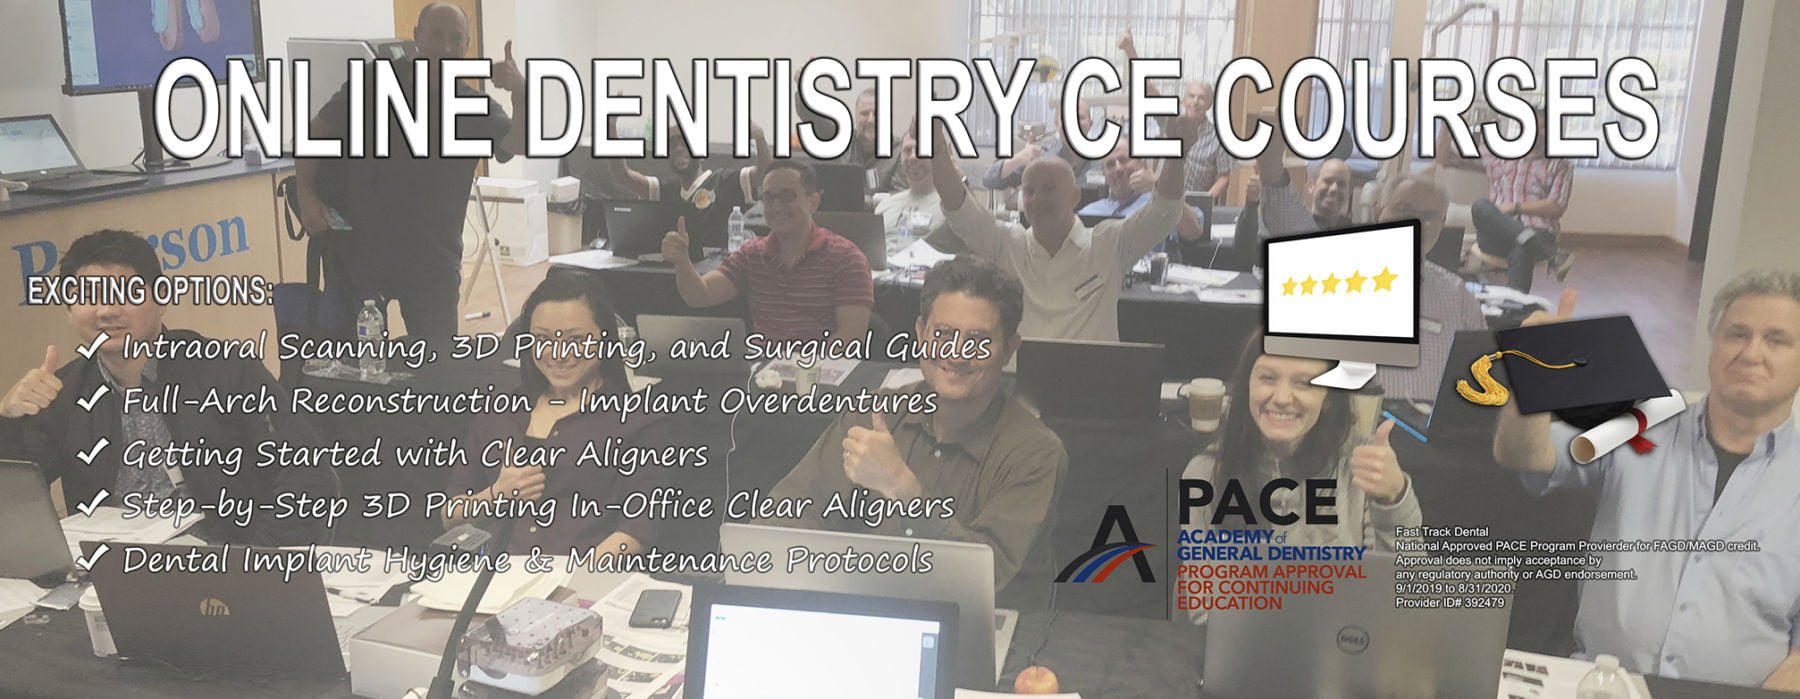 Online Dentistry Courses